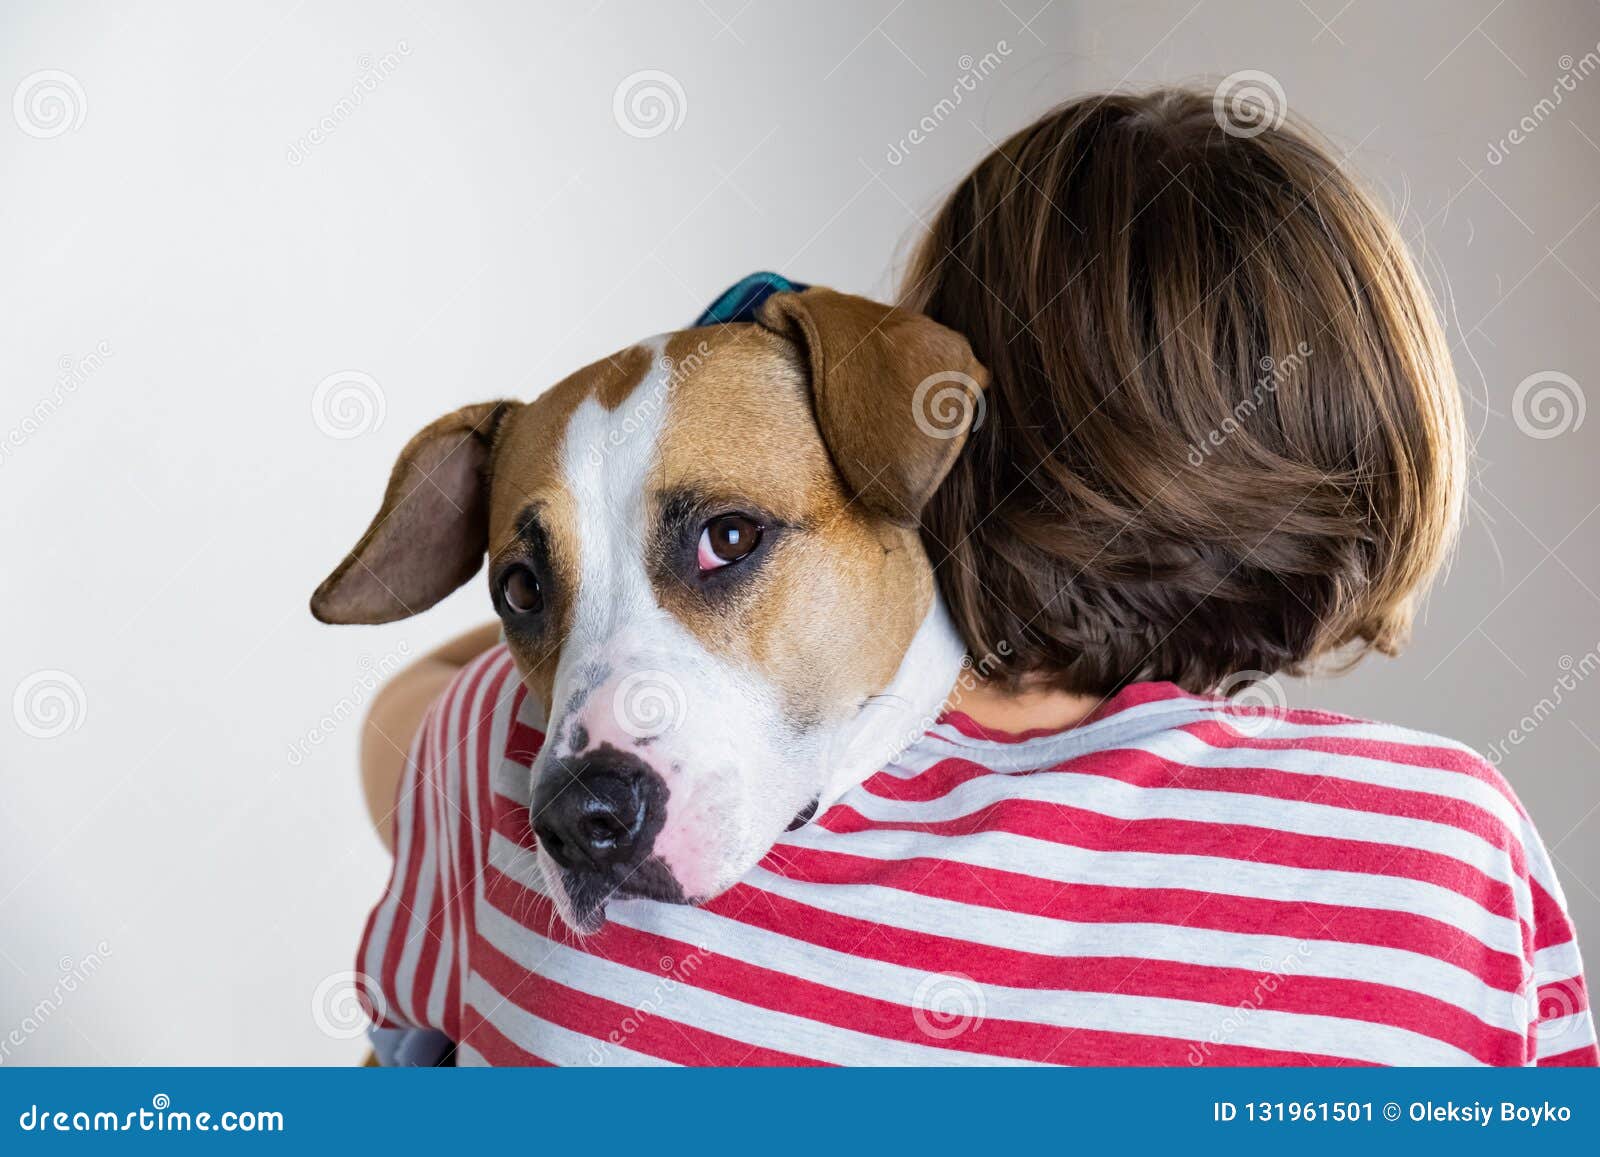 394 Animals Kindness To Stock Photos - Free & Royalty-Free Stock Photos  from Dreamstime